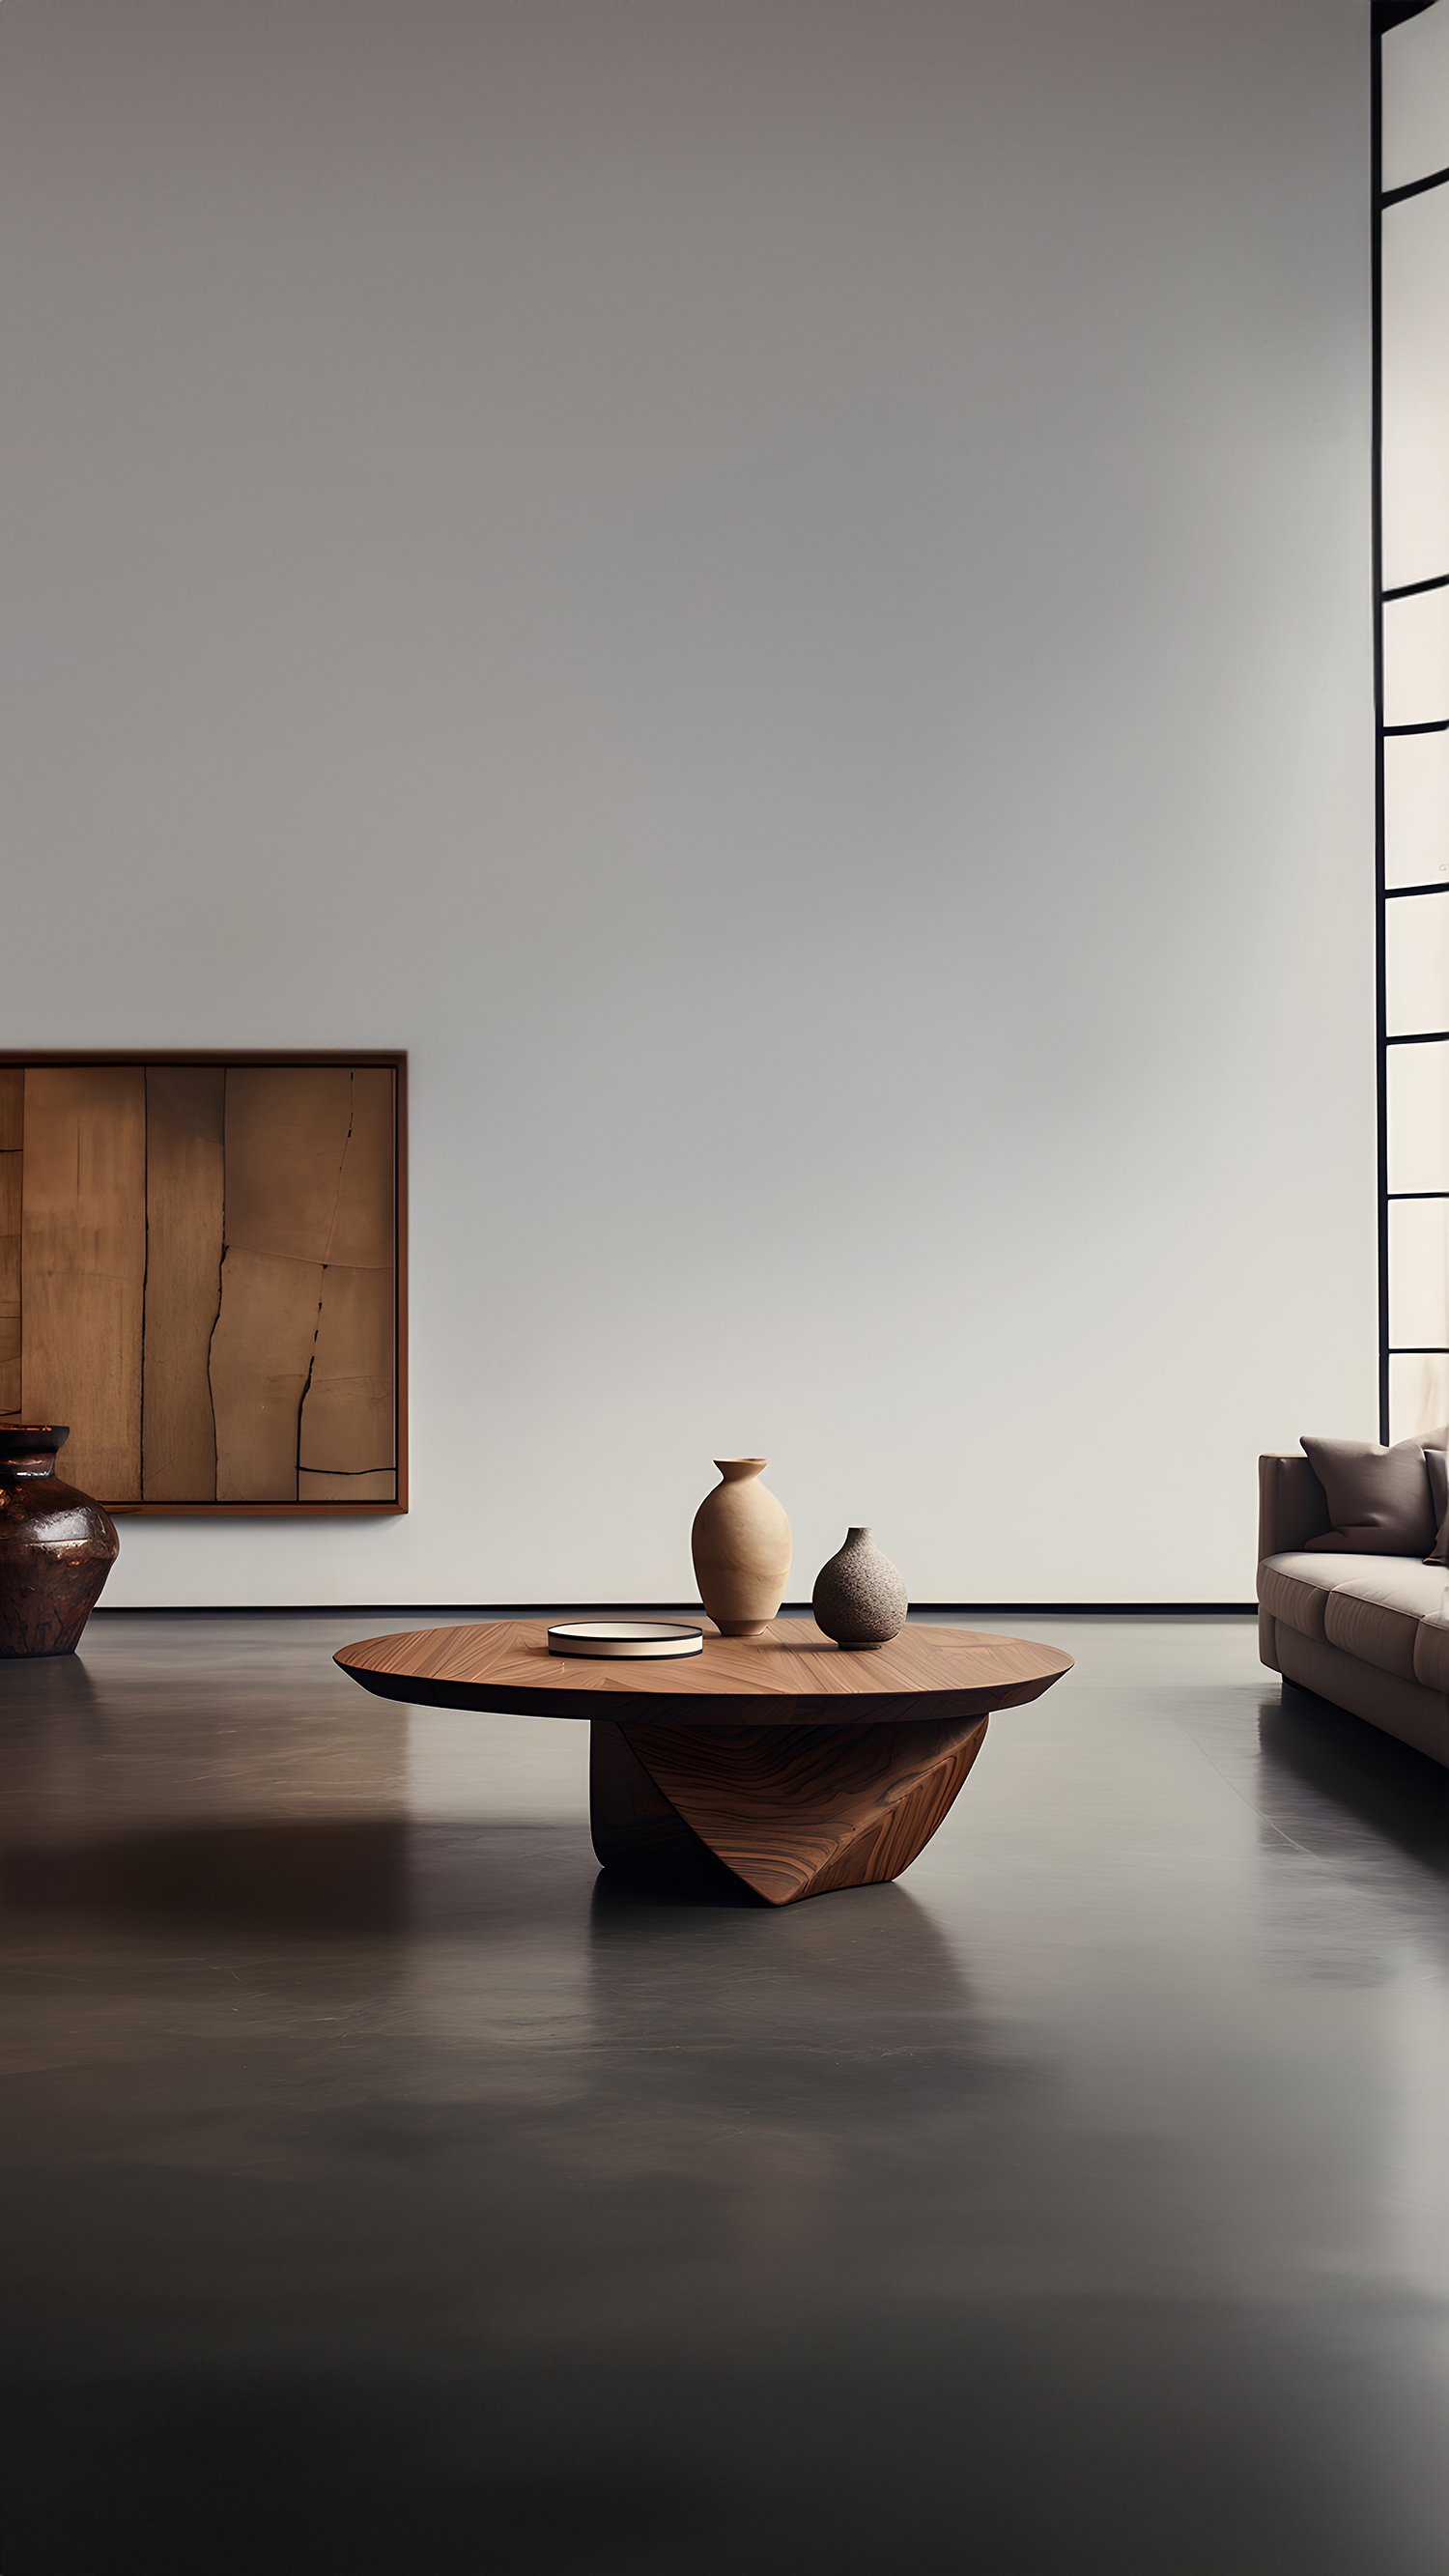 Sculptural Coffee Table Made of Solid Wood, Center Table Solace S32 by Joel Escalona — 9.jpg